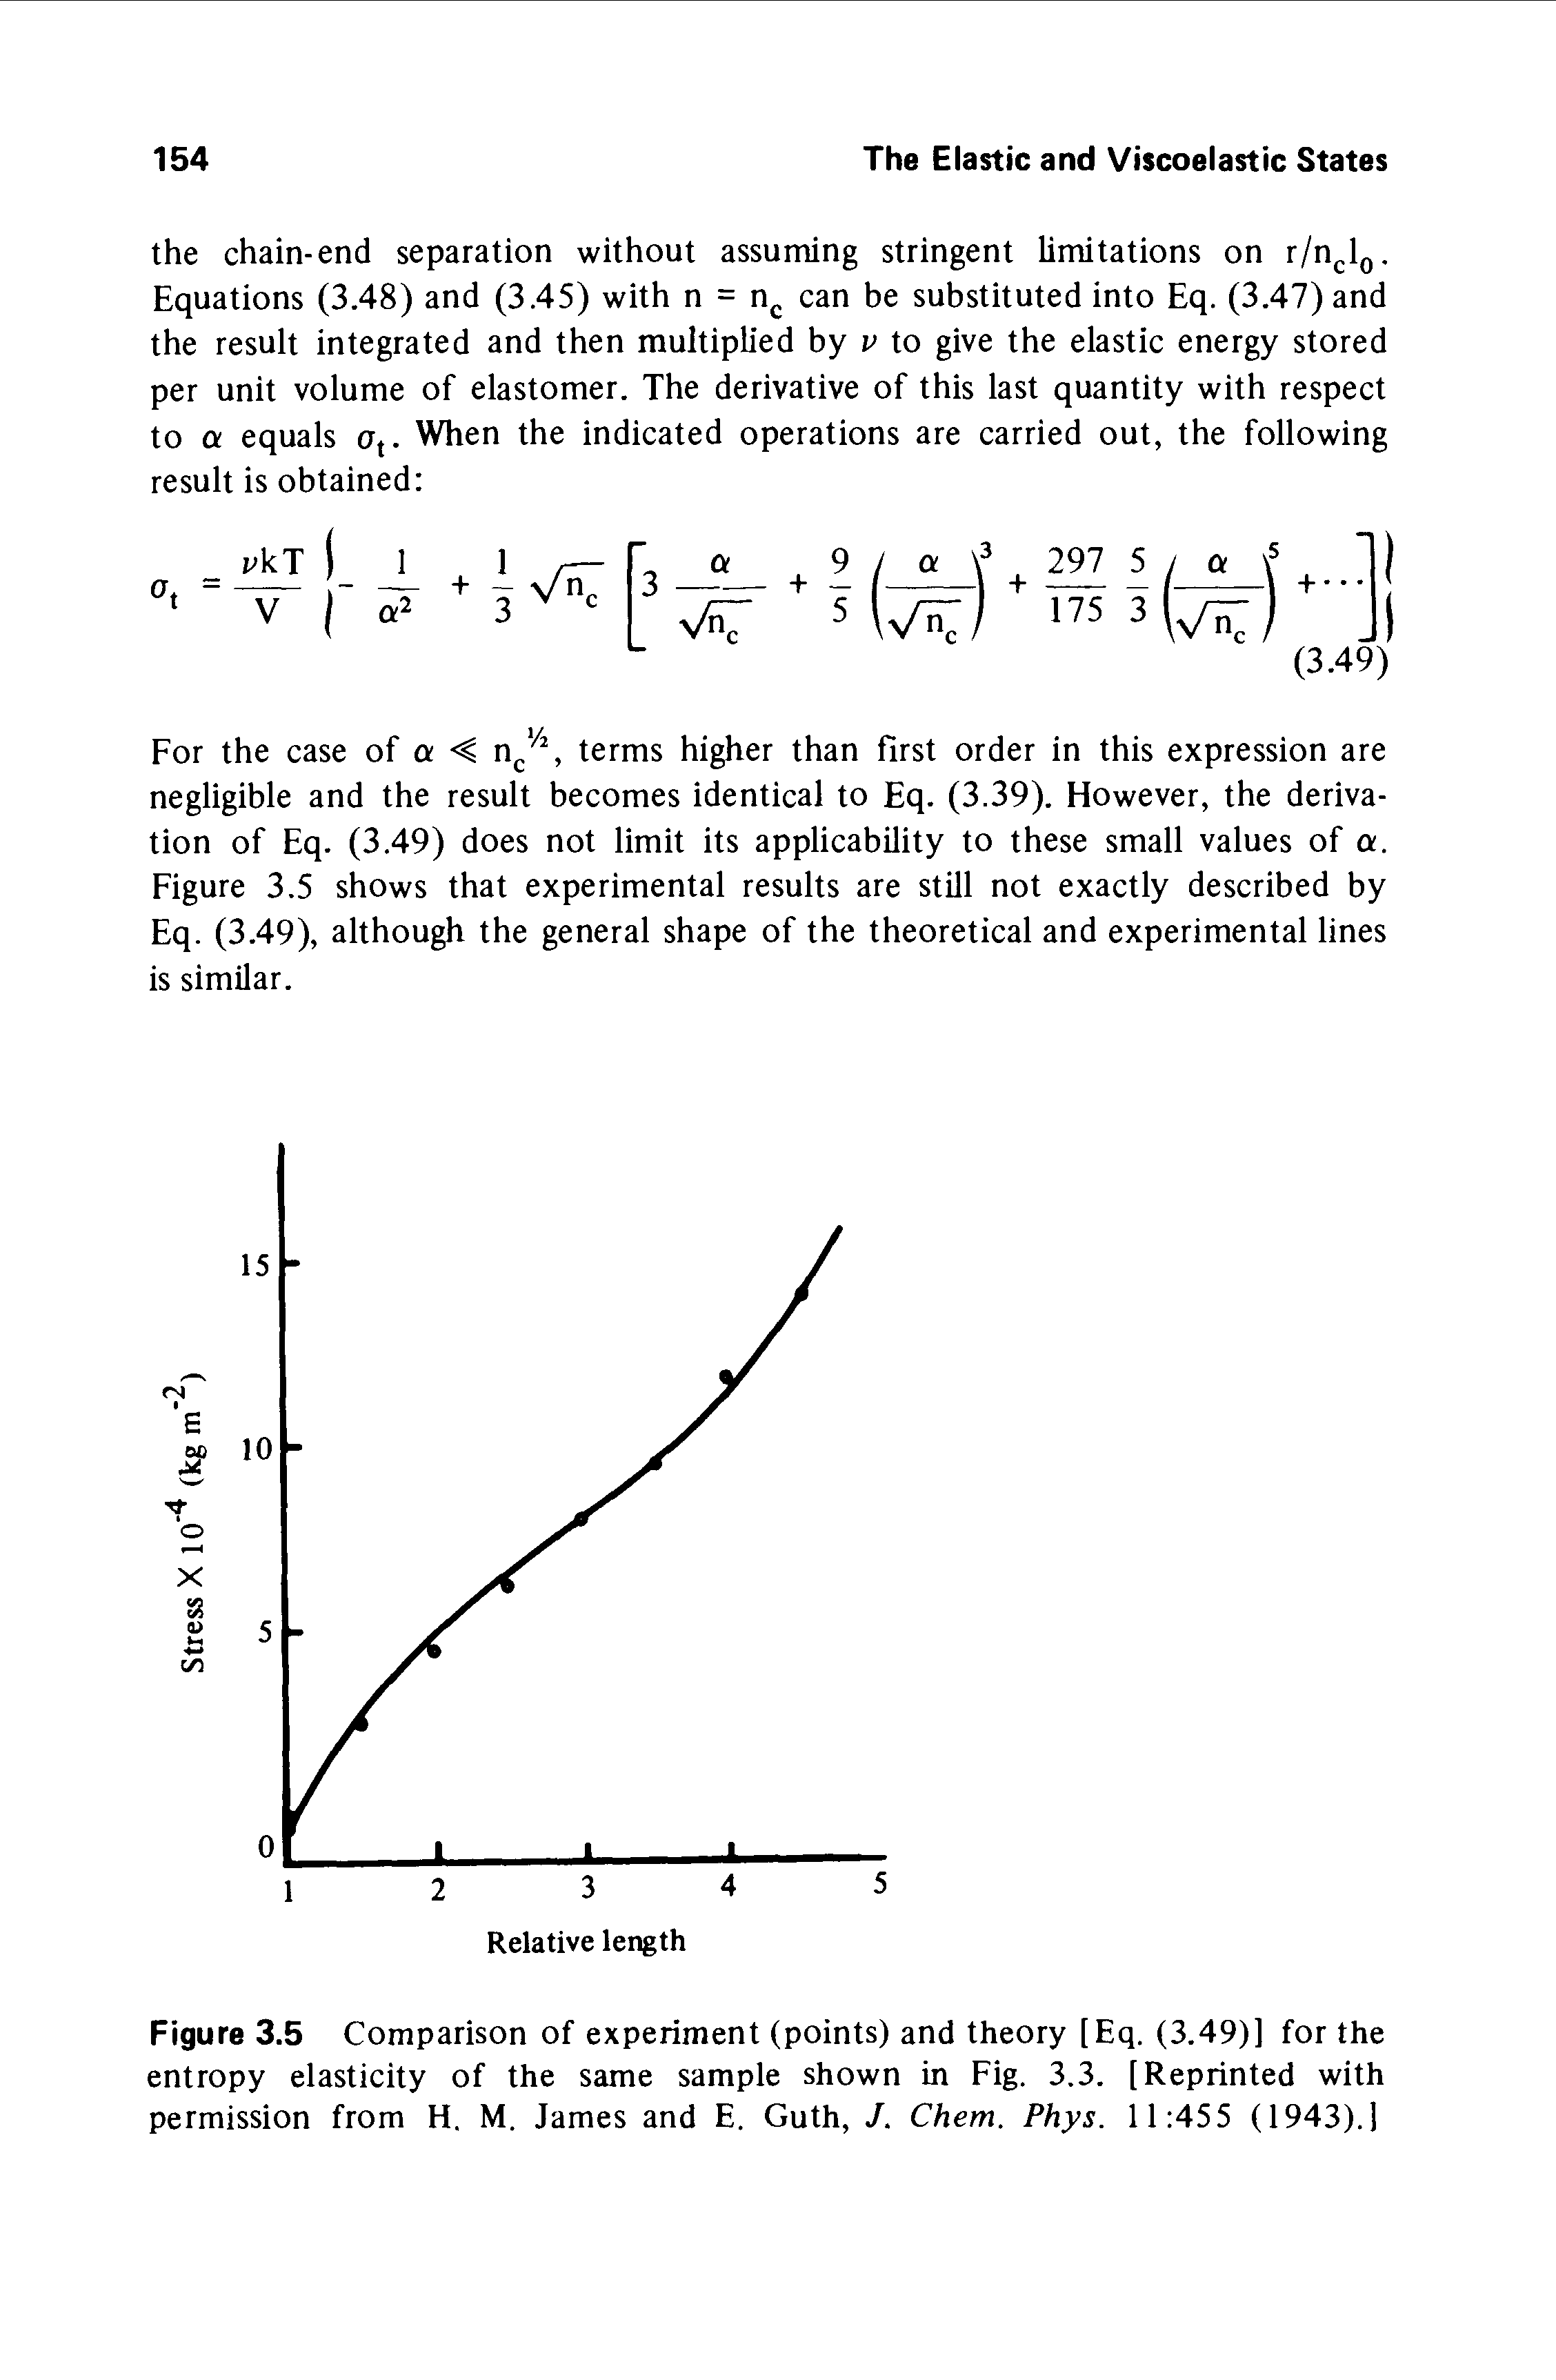 Figure 3.5 Comparison of experiment (points) and theory [Eq. (3.49)] for the entropy elasticity of the same sample shown in Fig. 3.3. [Reprinted with permission from H. M. James and E. Guth, J. Chem. Phys. 11 455 (1943).]...